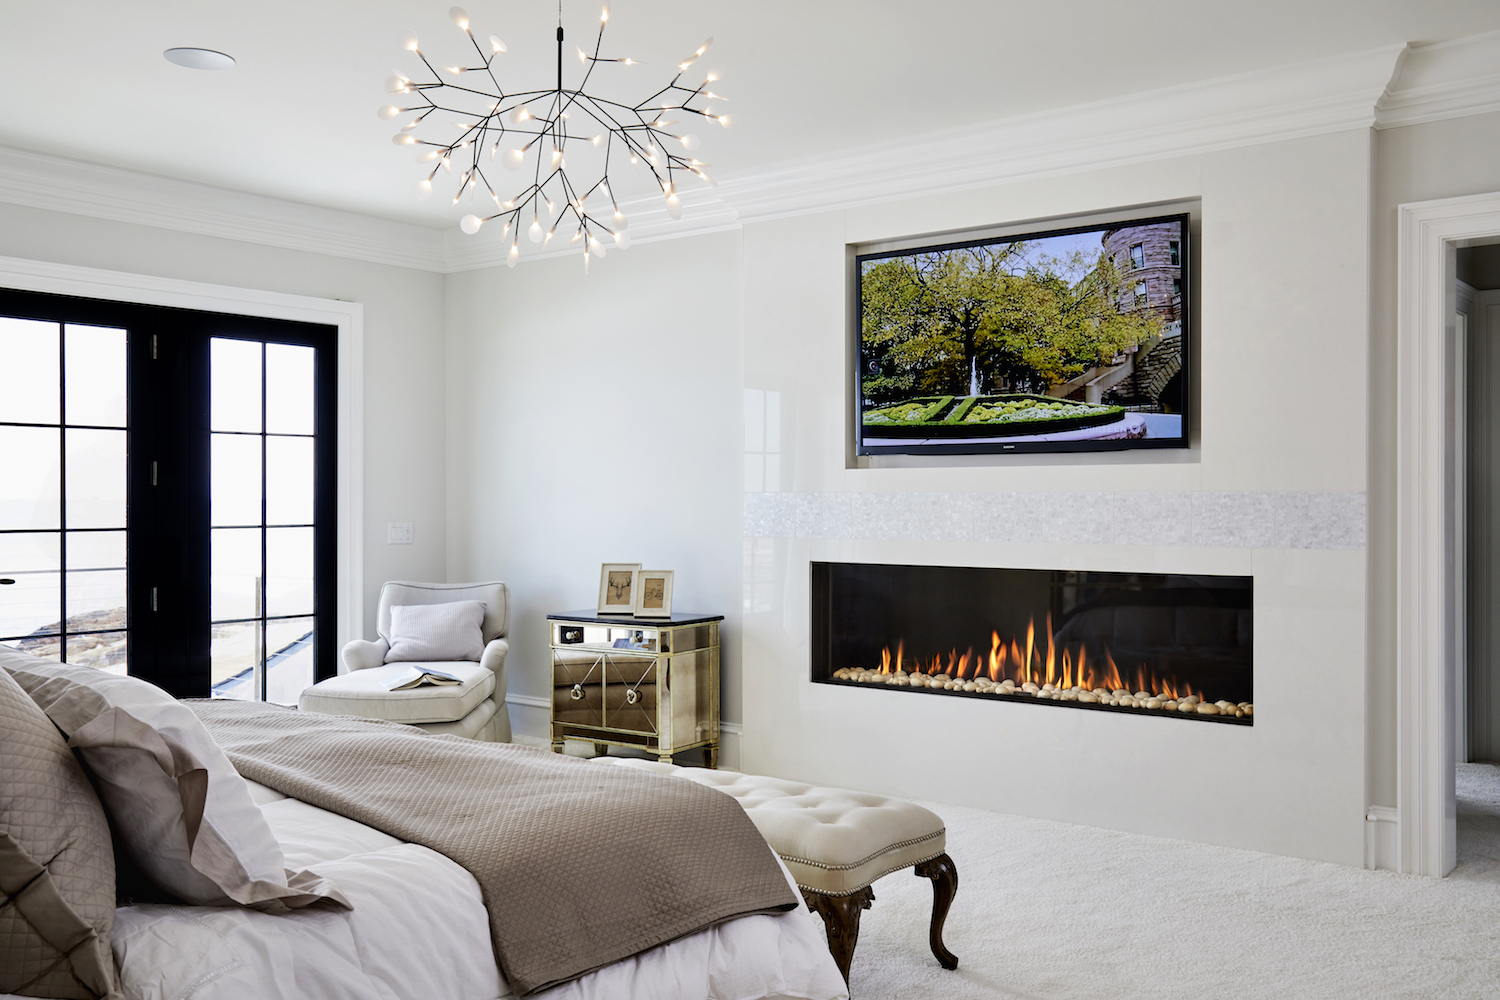 Is Your Home Right for a Brand New Luxury Fireplace